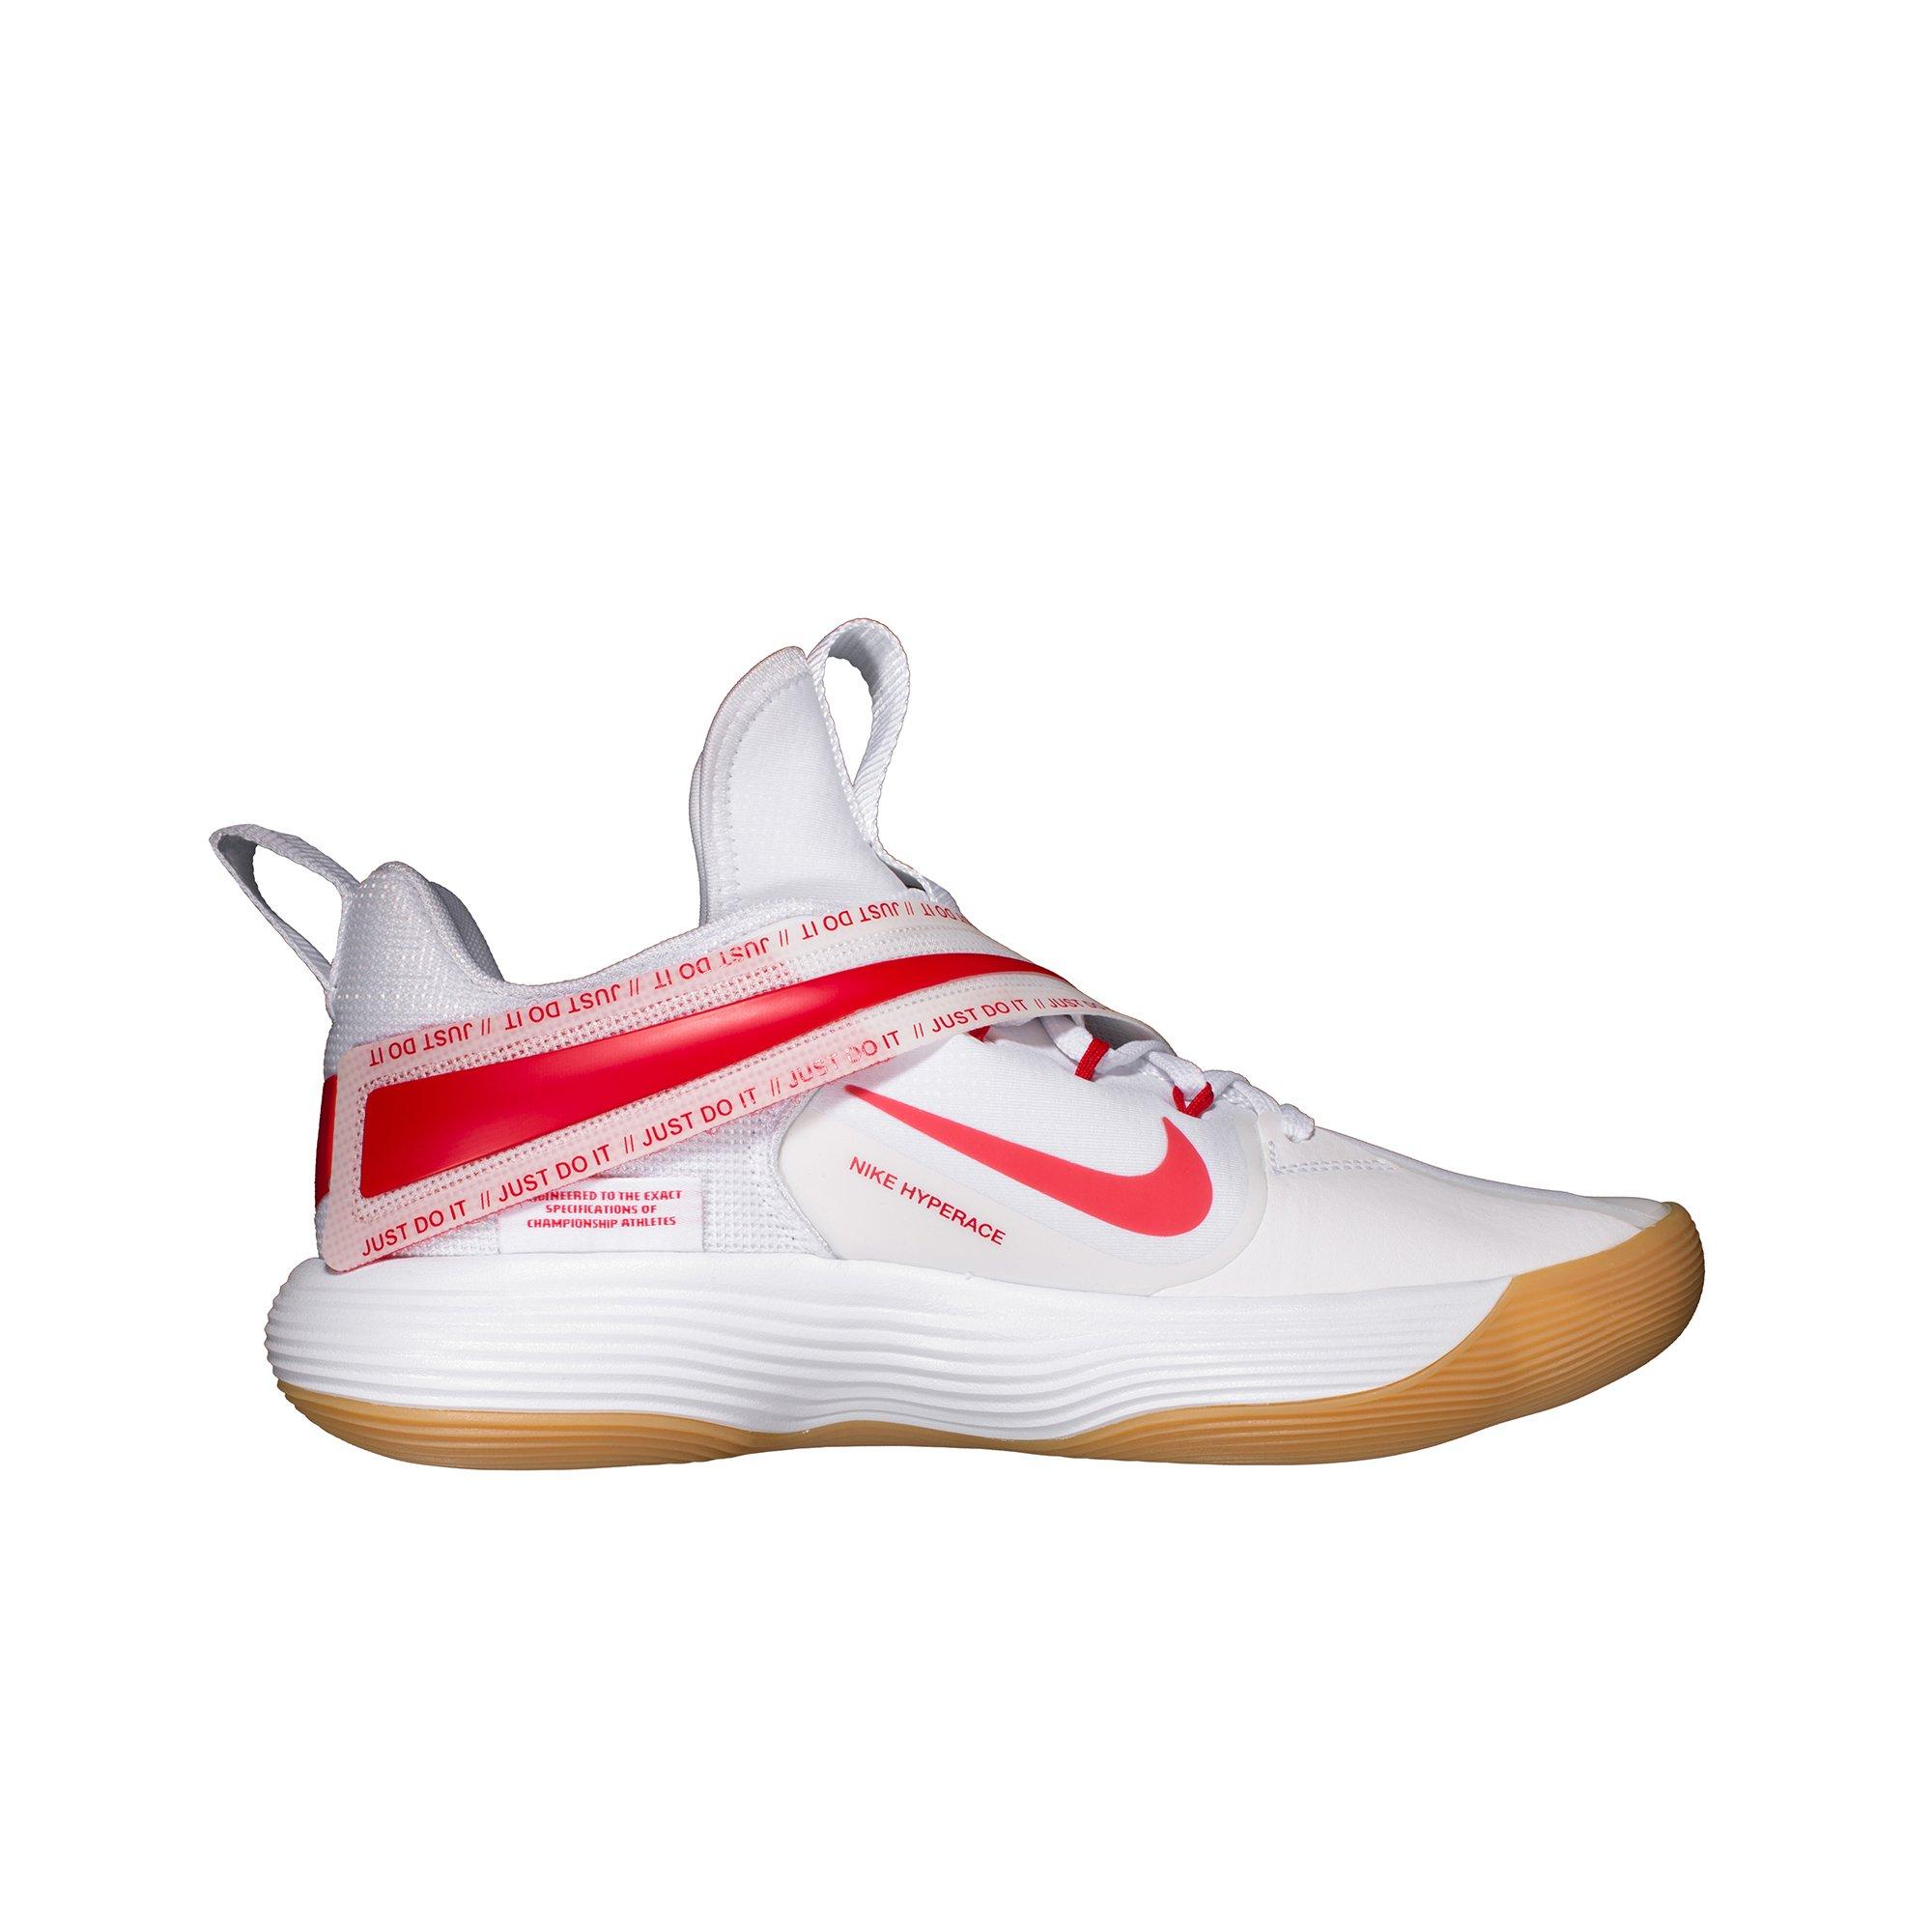 Nike React HyperSet "White/University Red" Women's Volleyball